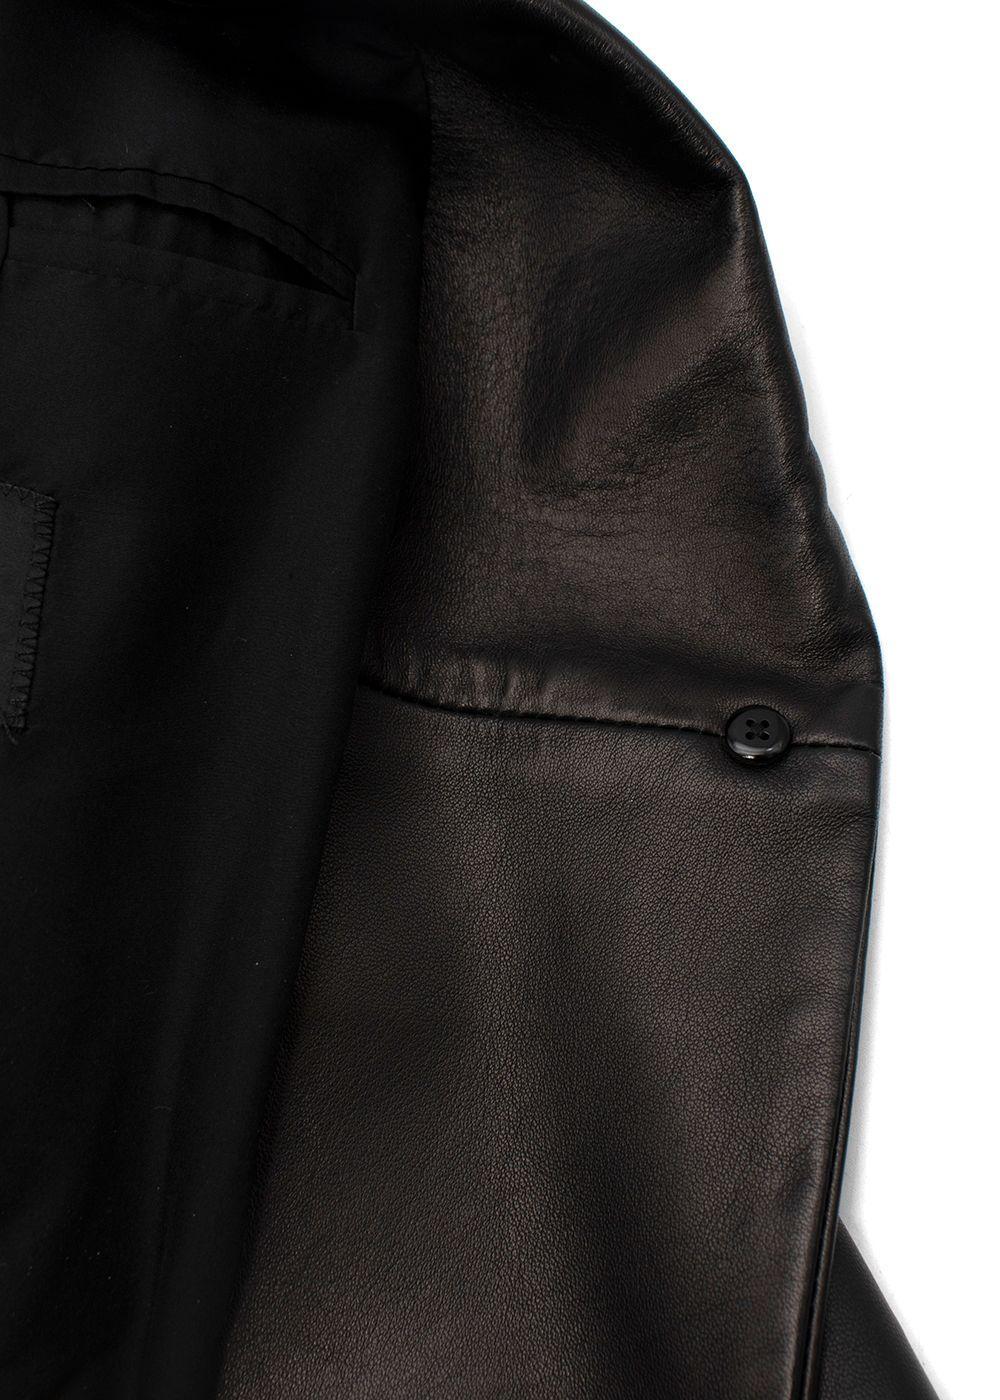 The Row Black Leather Jacket - US 6 For Sale 1